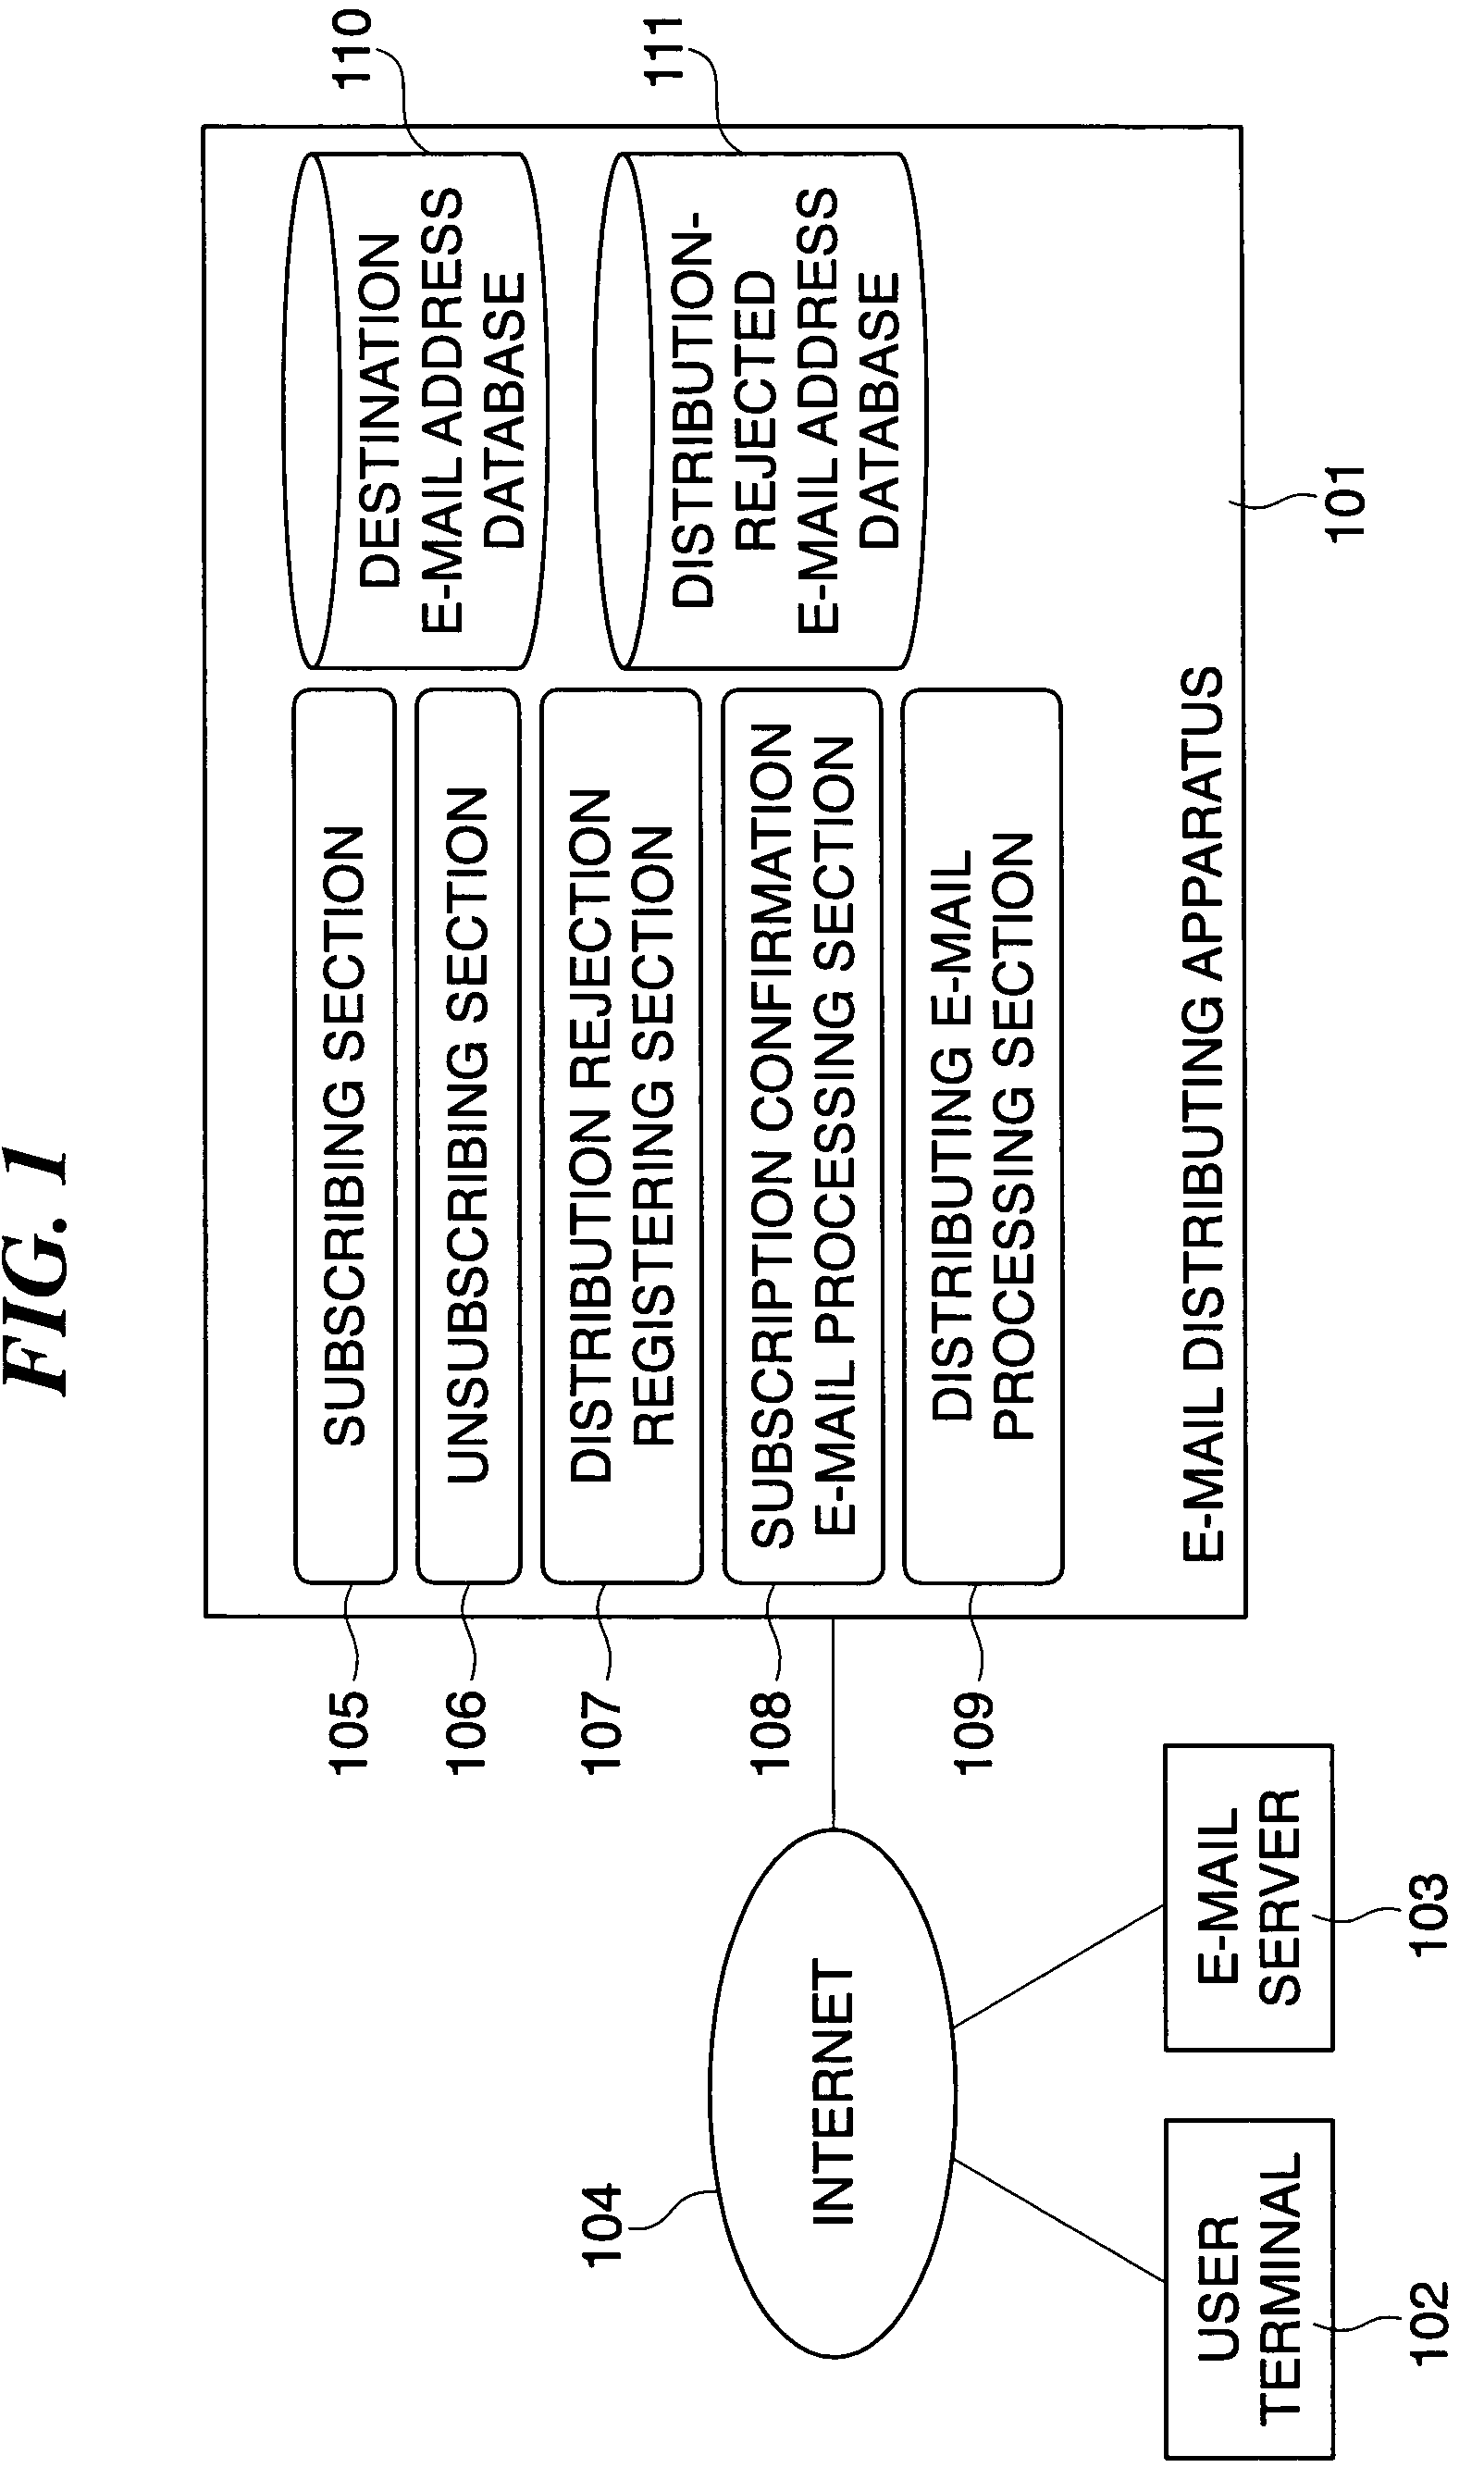 Electronic mail distributing apparatus with email address registration or authentication features, electronic mail distributing method therefor, and storage medium storing a program for the apparatus